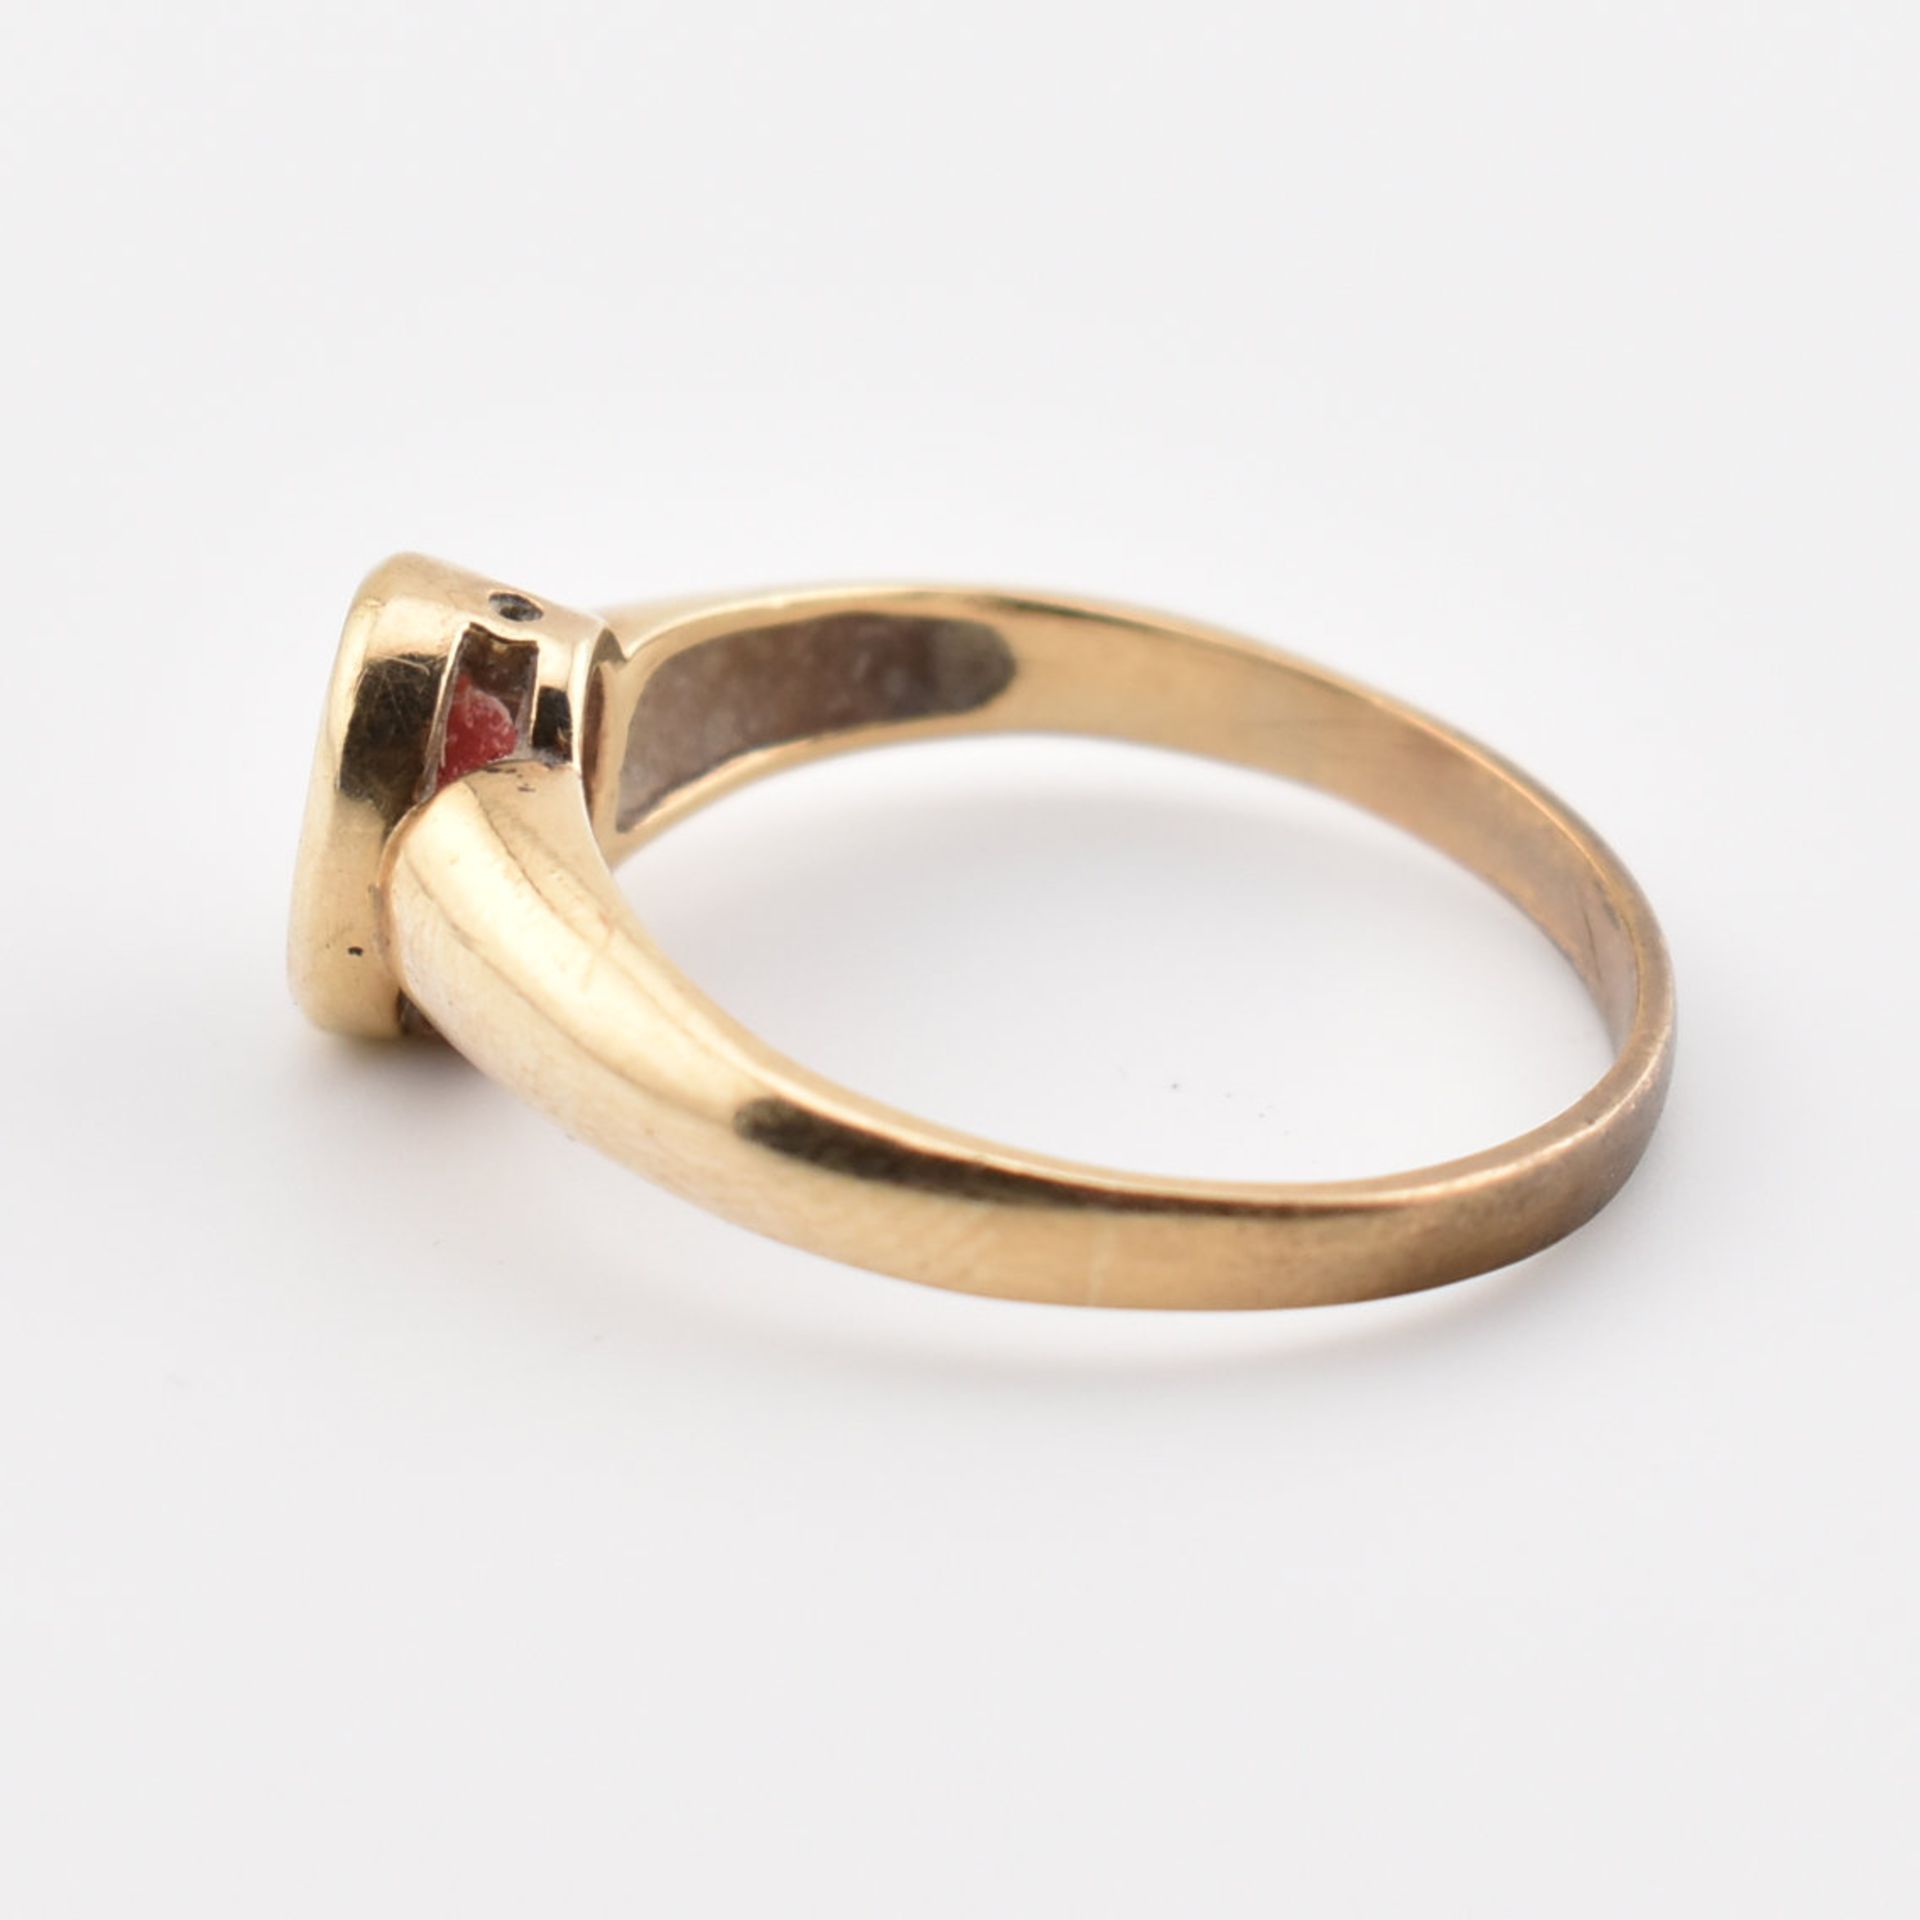 HALLMARKED 9CT GOLD & RED STONE SOLITAIRE RING - Image 3 of 7